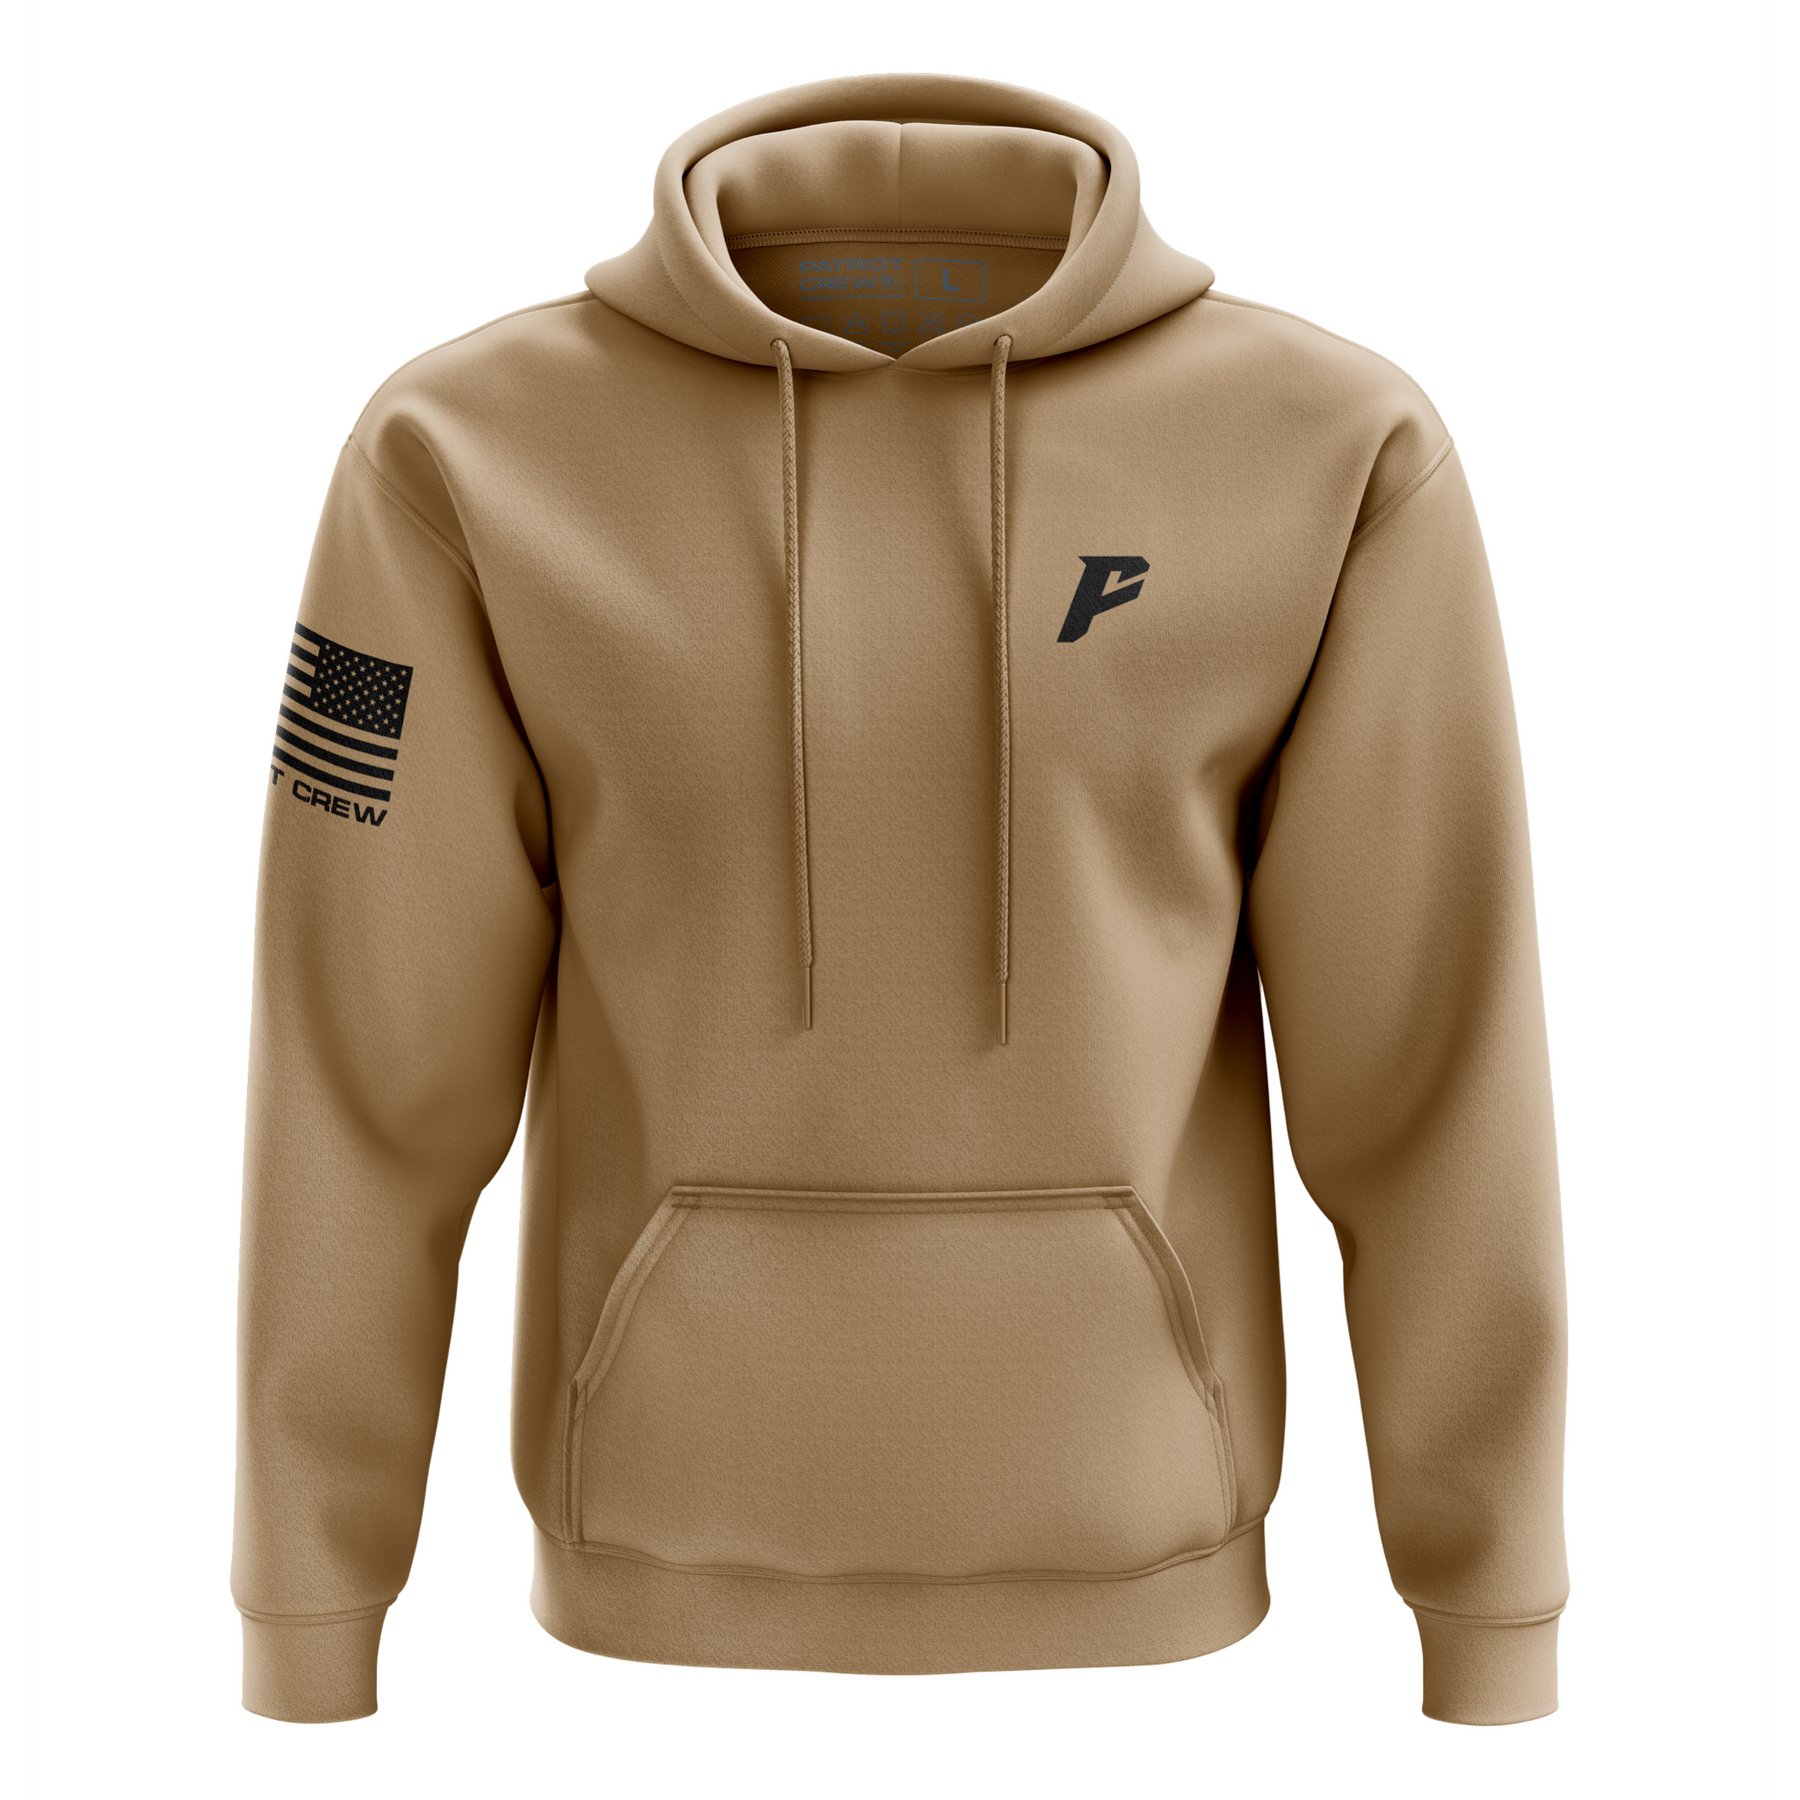 Yearn For Peace Hoodie